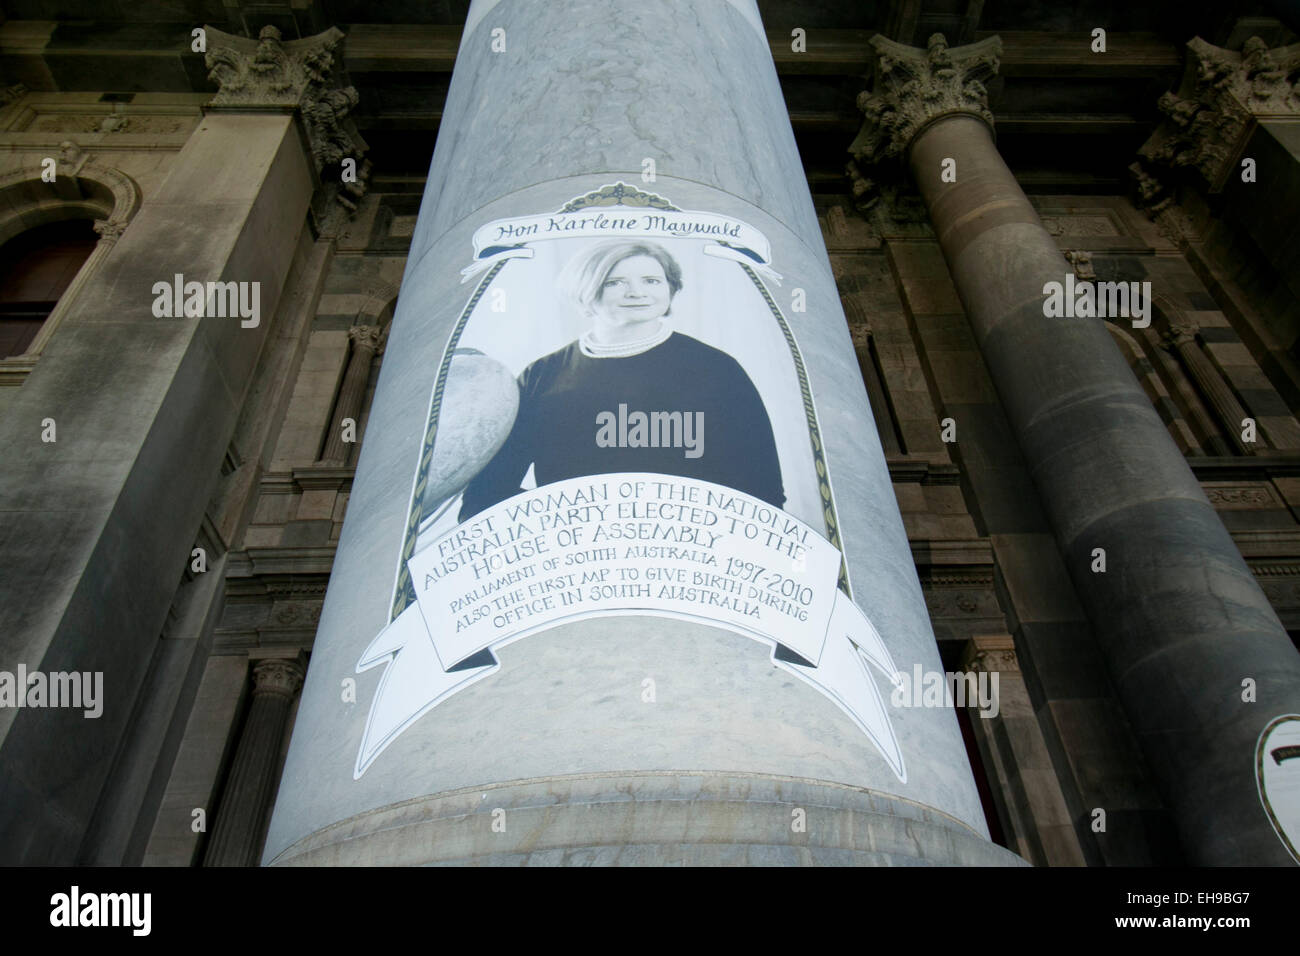 Adelaide, Australia. 10th March 2015. The first serving women politicians including former Australian Prime Minister Julia Gillard  are named and pictured on the columns of South Australia parliament in Adelaide © amer ghazzal/Alamy Live News Stock Photo